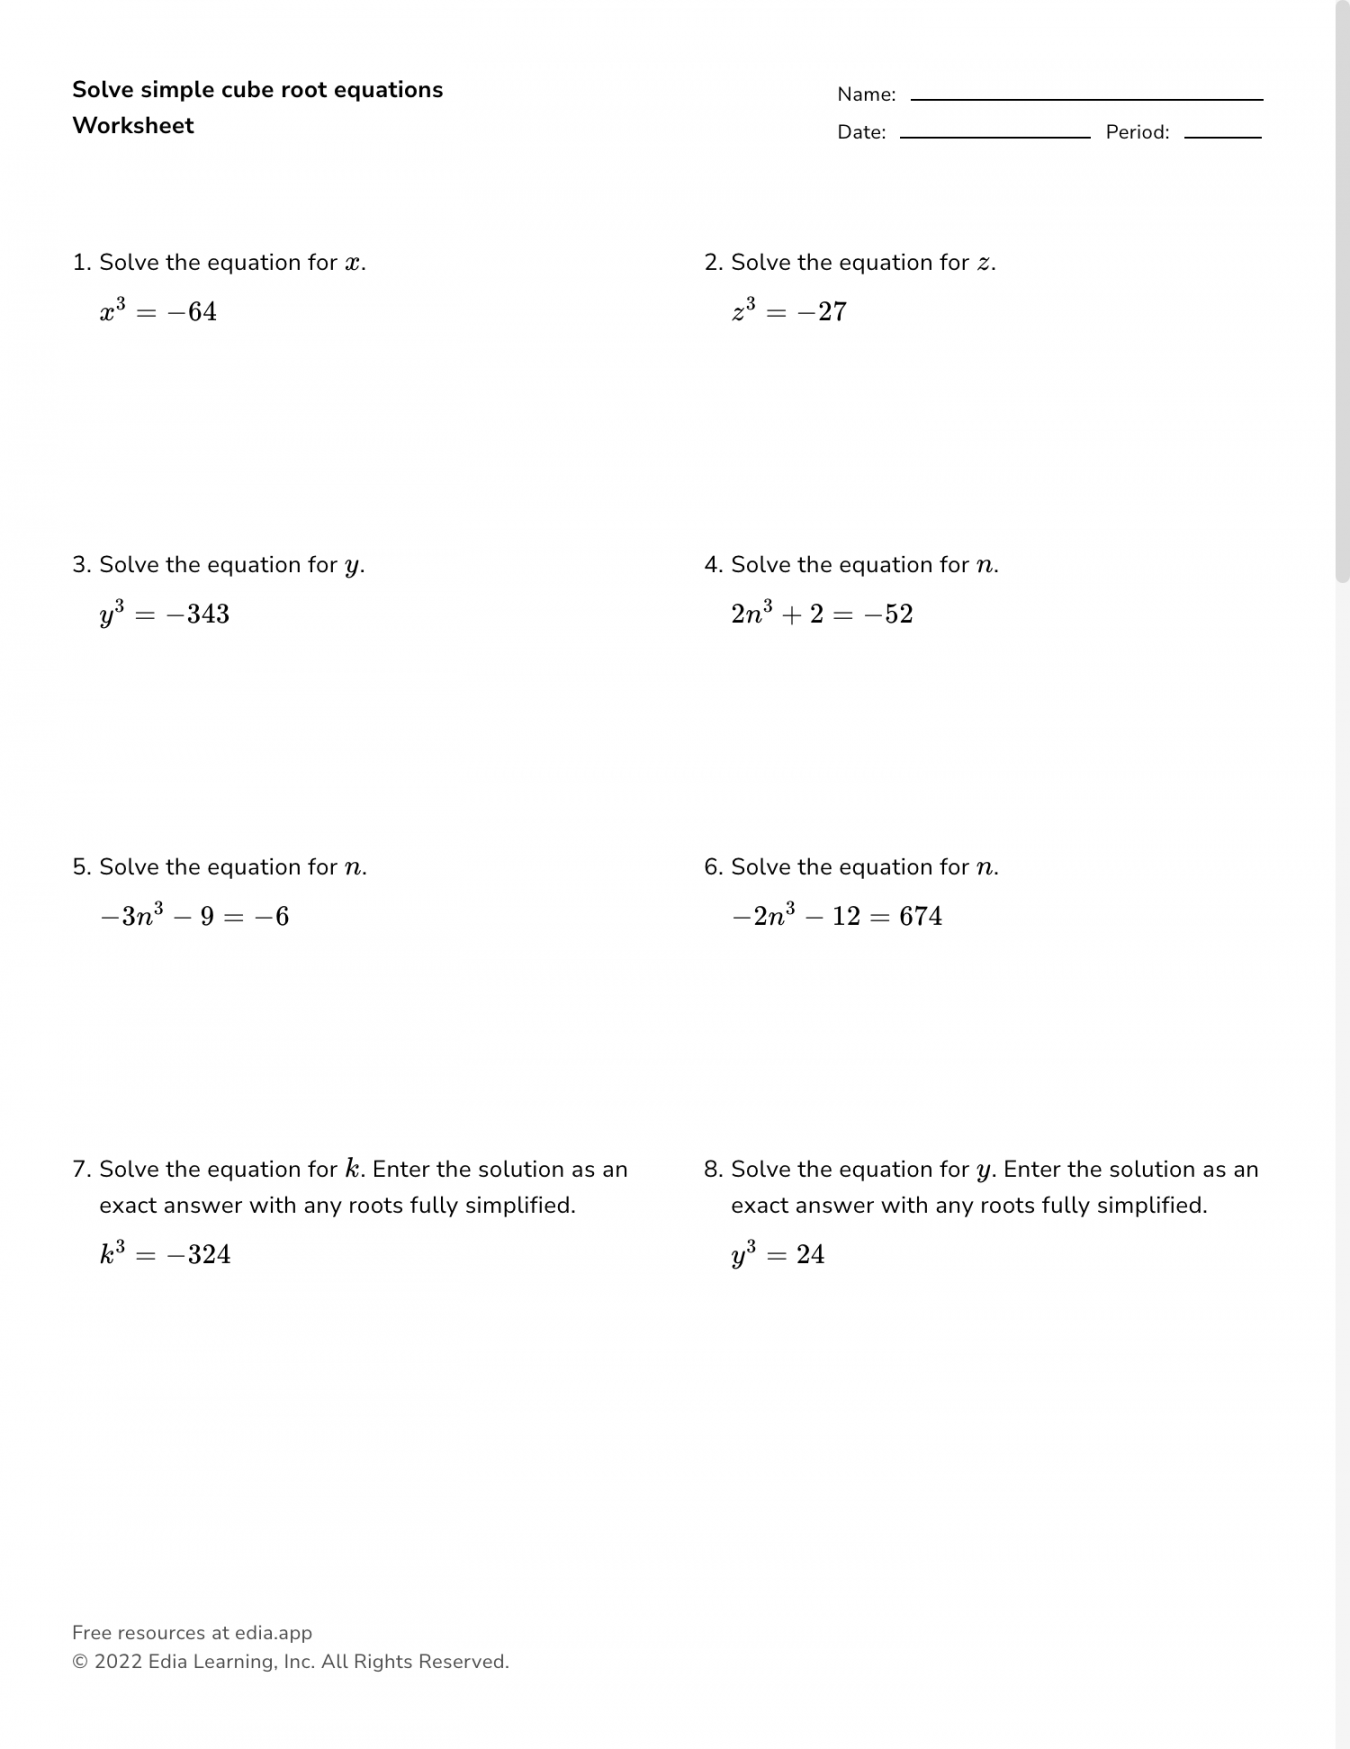 Solve Simple Cube Root Equations - Worksheet